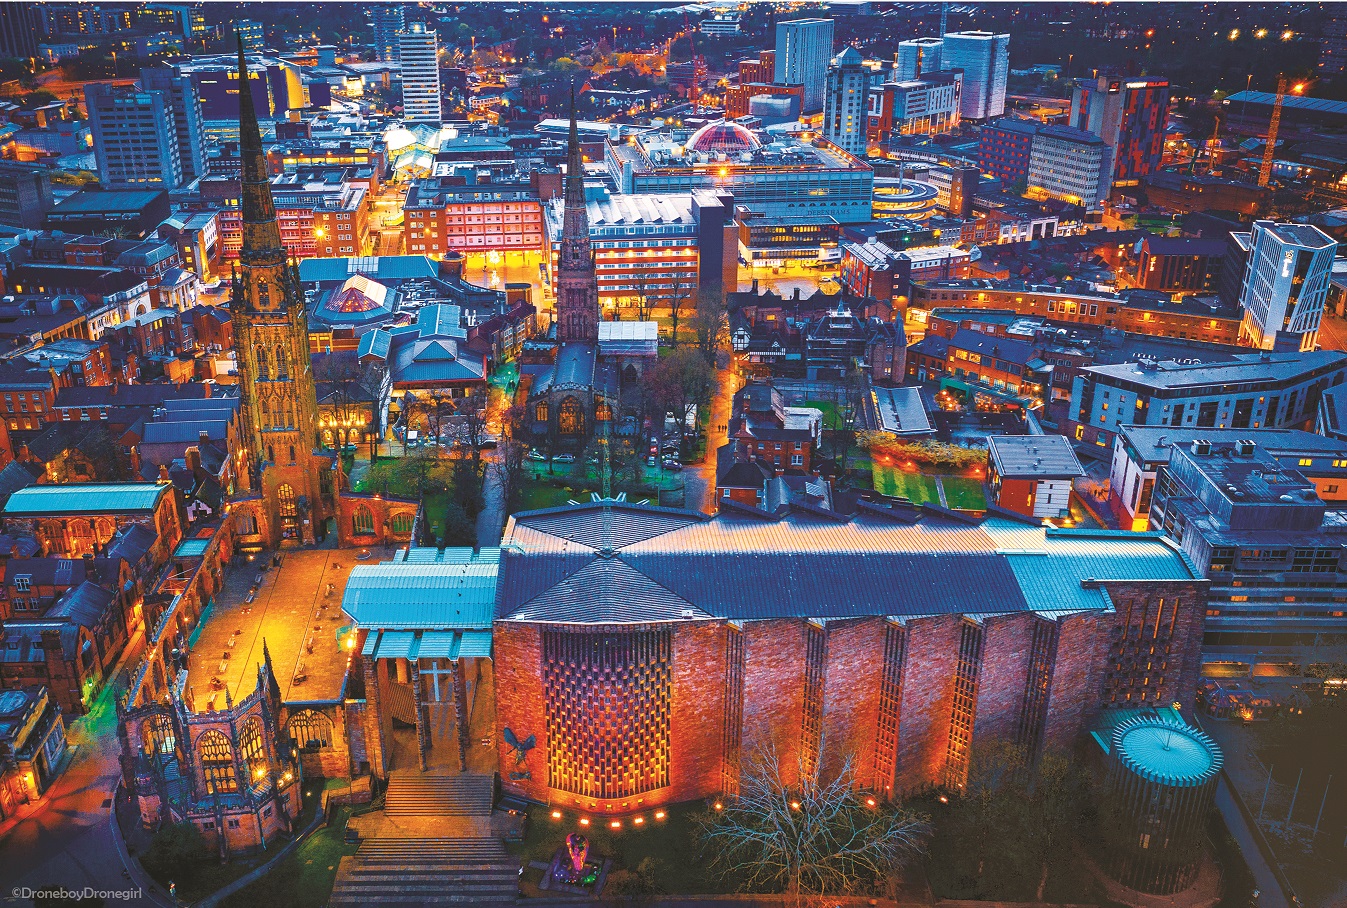 Coventry and Warwickshire targeting growth in international business tourism